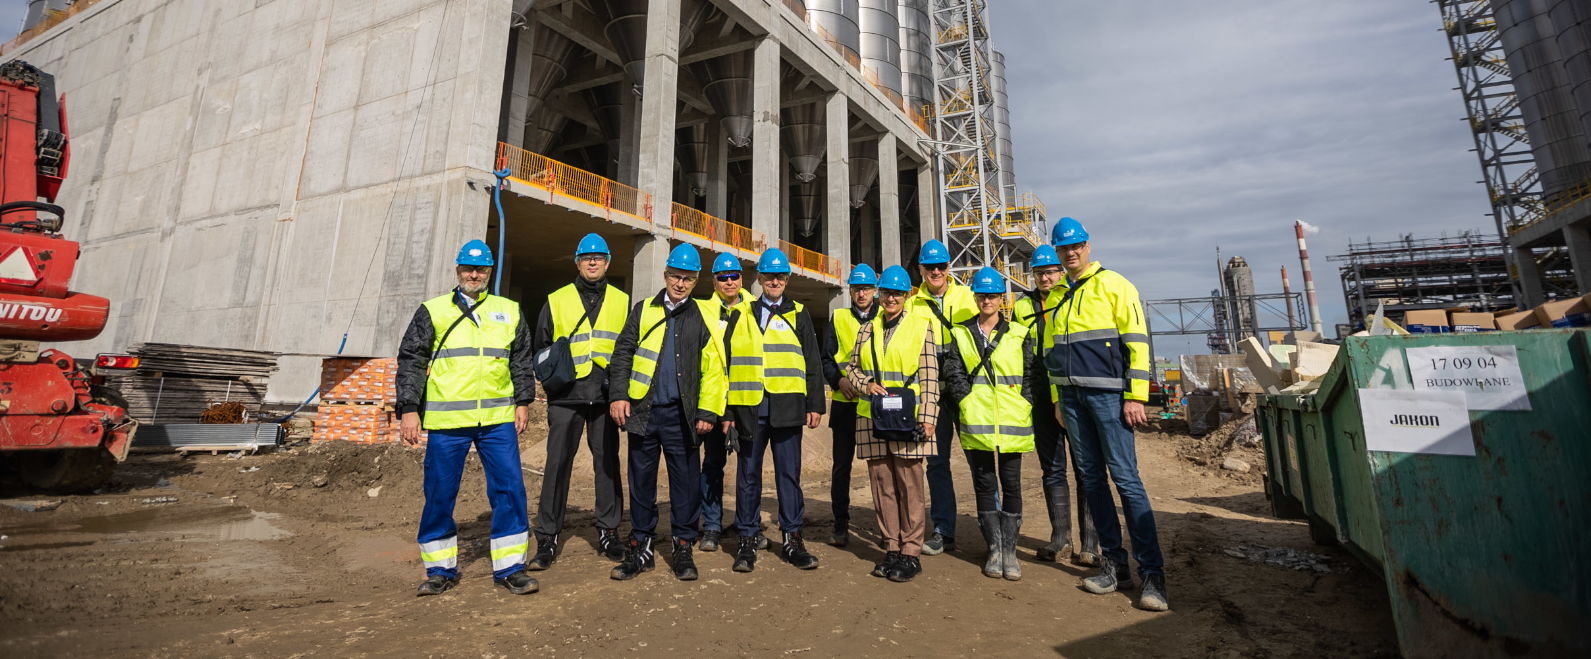 Visit of the Supervisory Board at the construction site